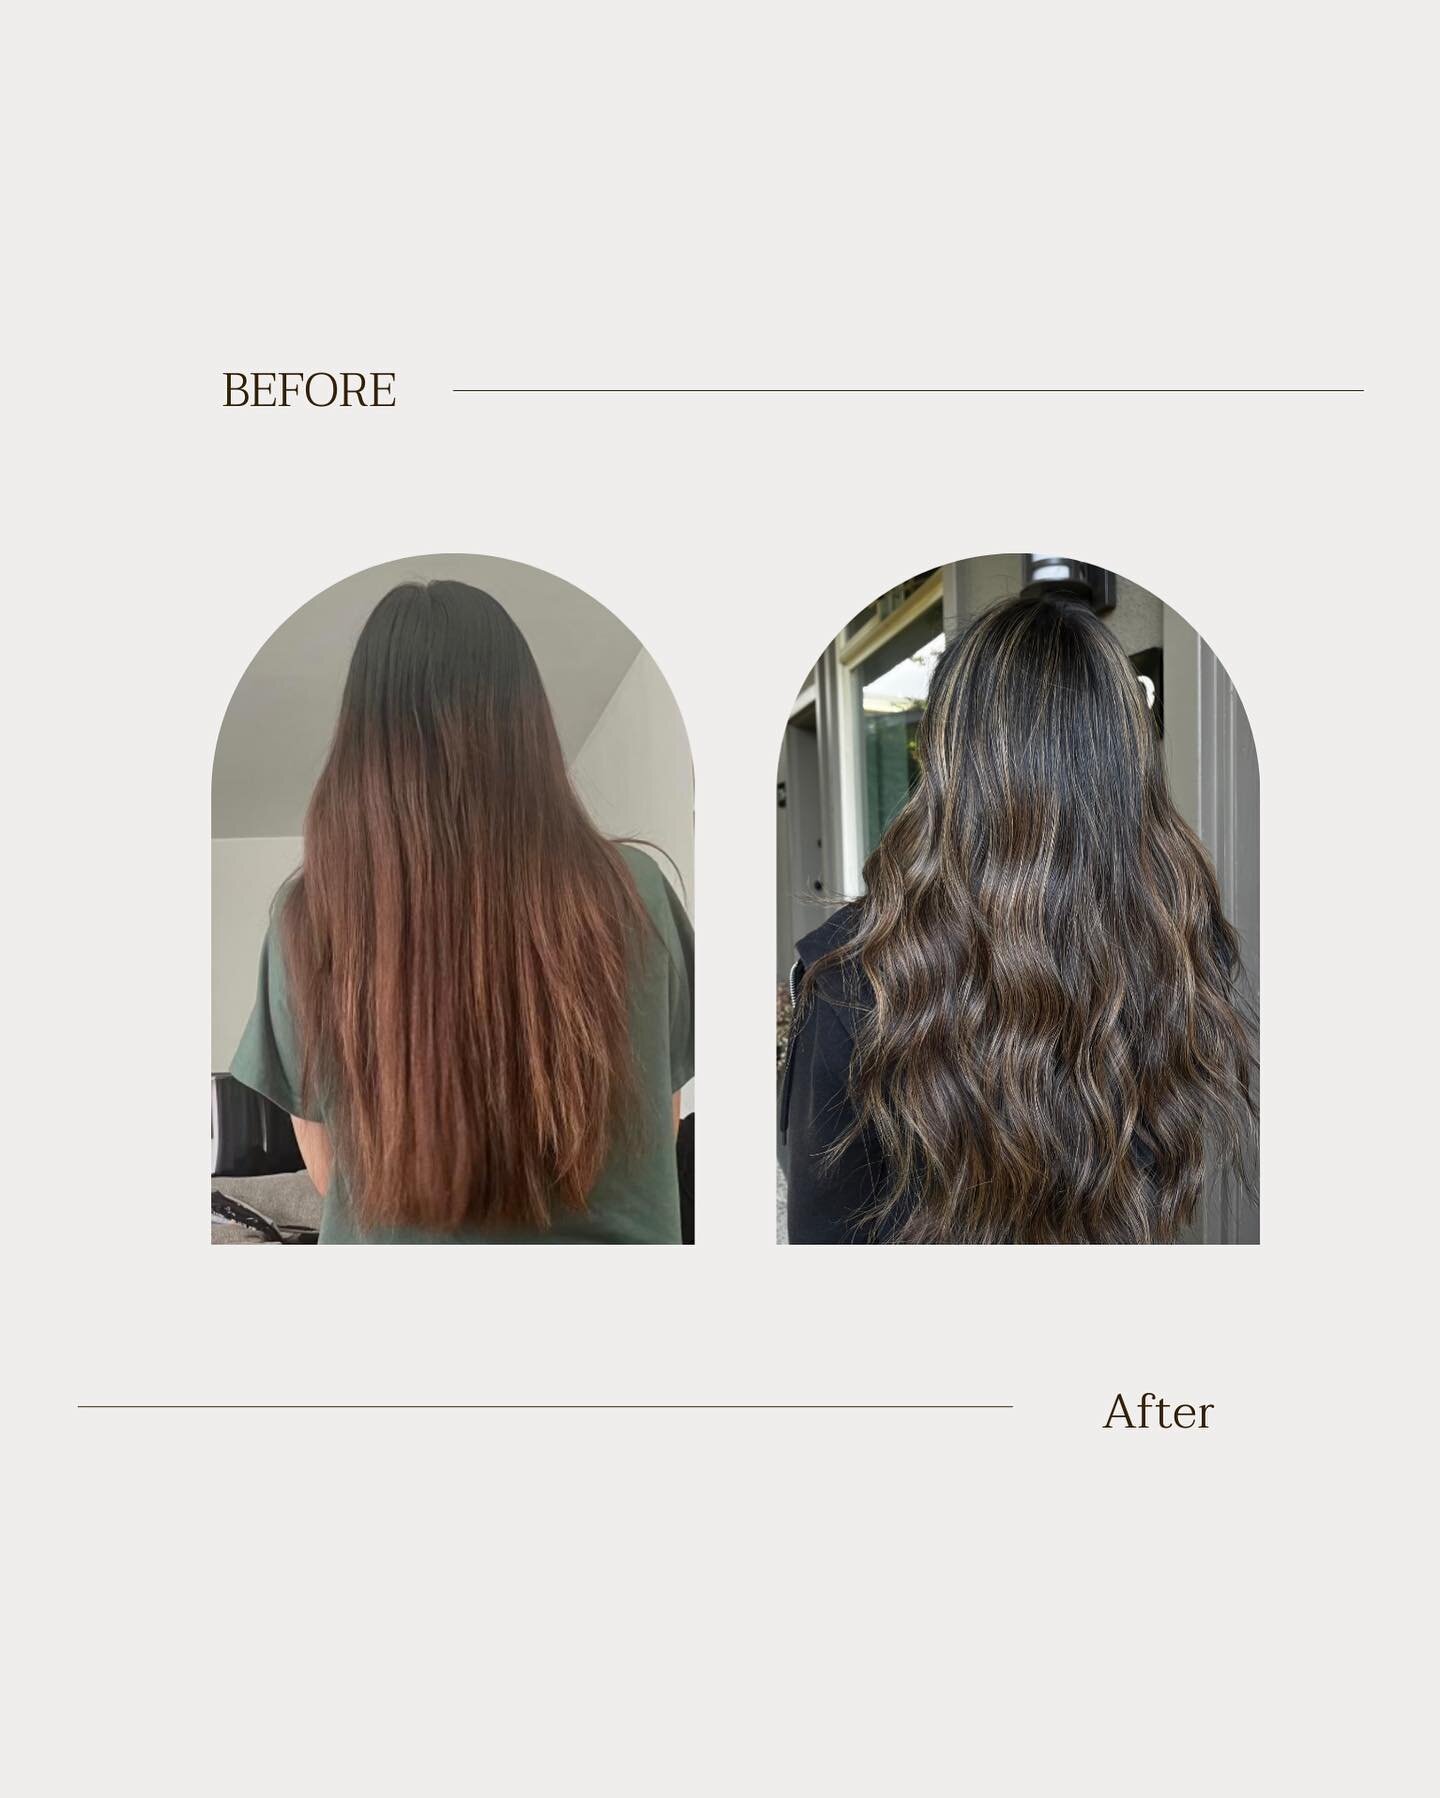 Alexandra creating her magic. From a grown out single process color to a beautiful bronde balayage. #berkeleysalon #berkeleystylist #balayage #bronde